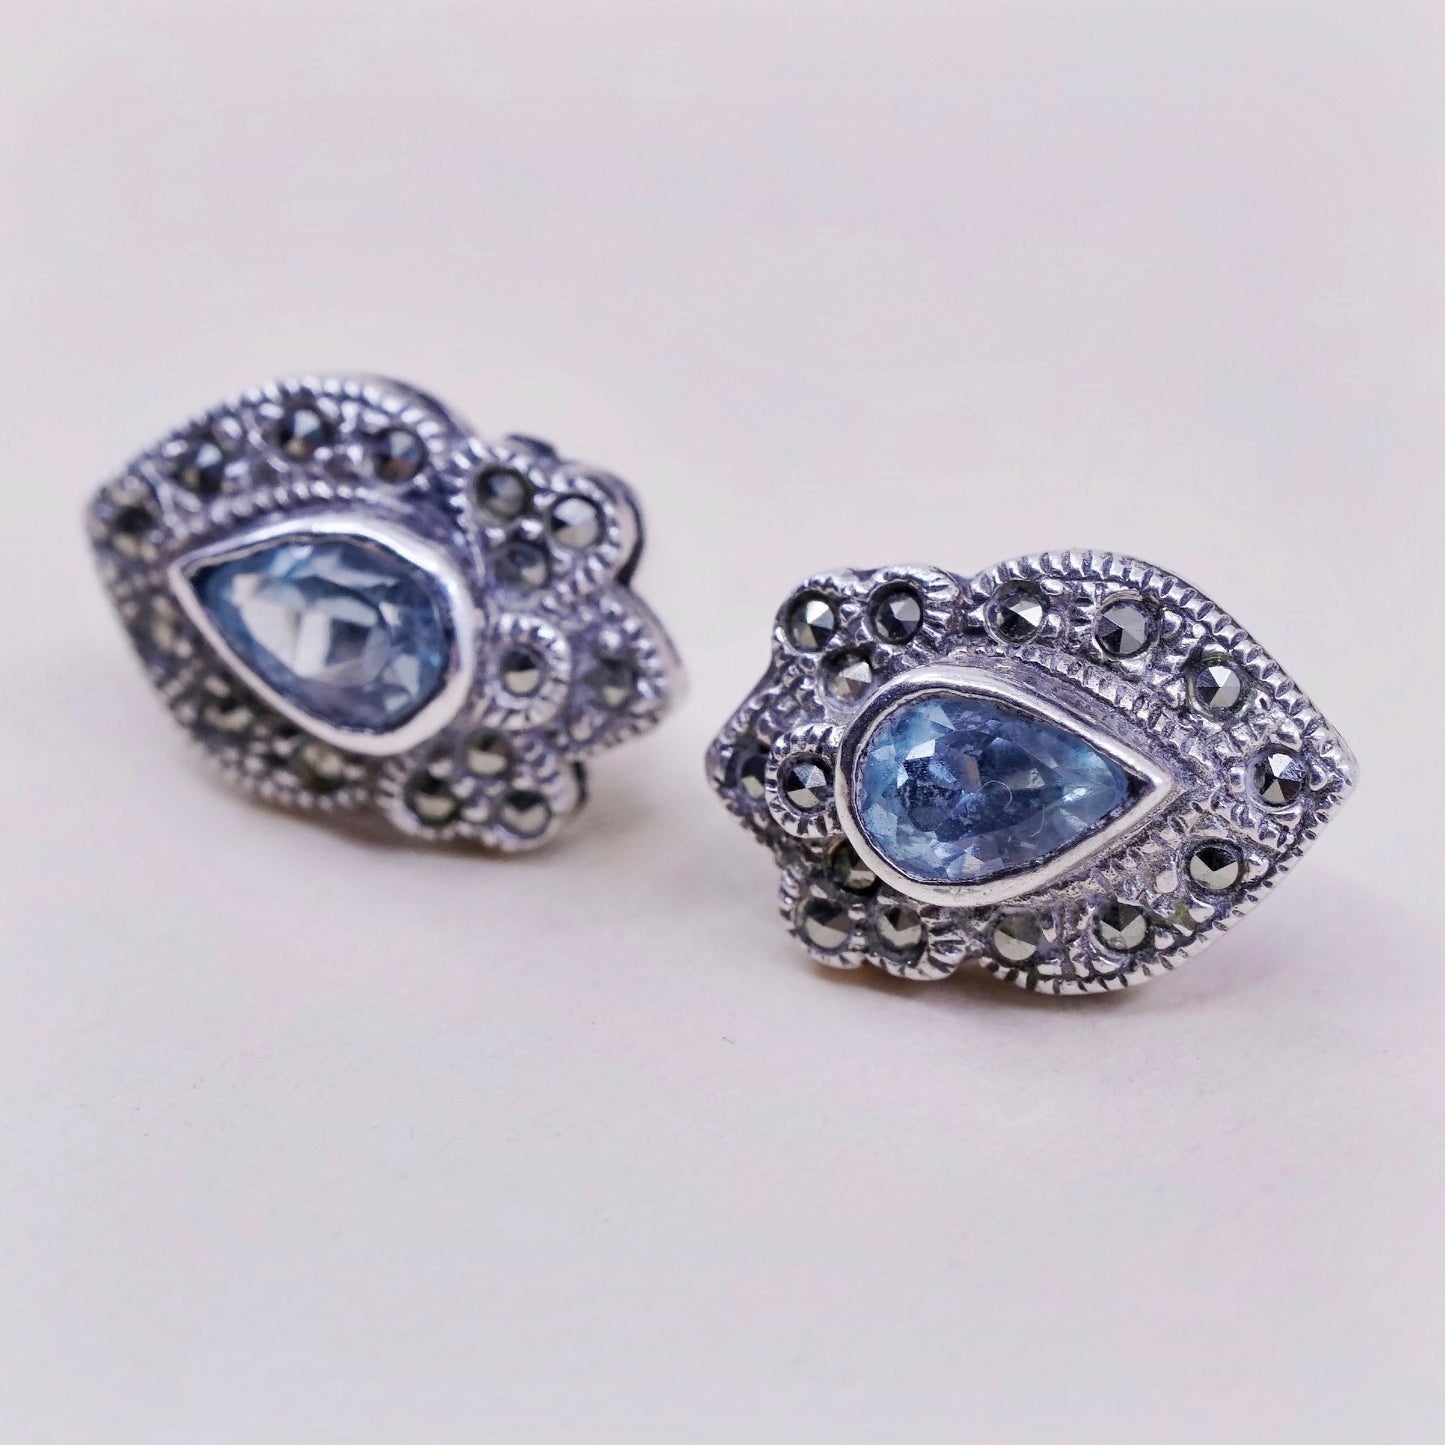 Vintage Sterling silver handmade earrings, 925 studs with topaz and marcasite